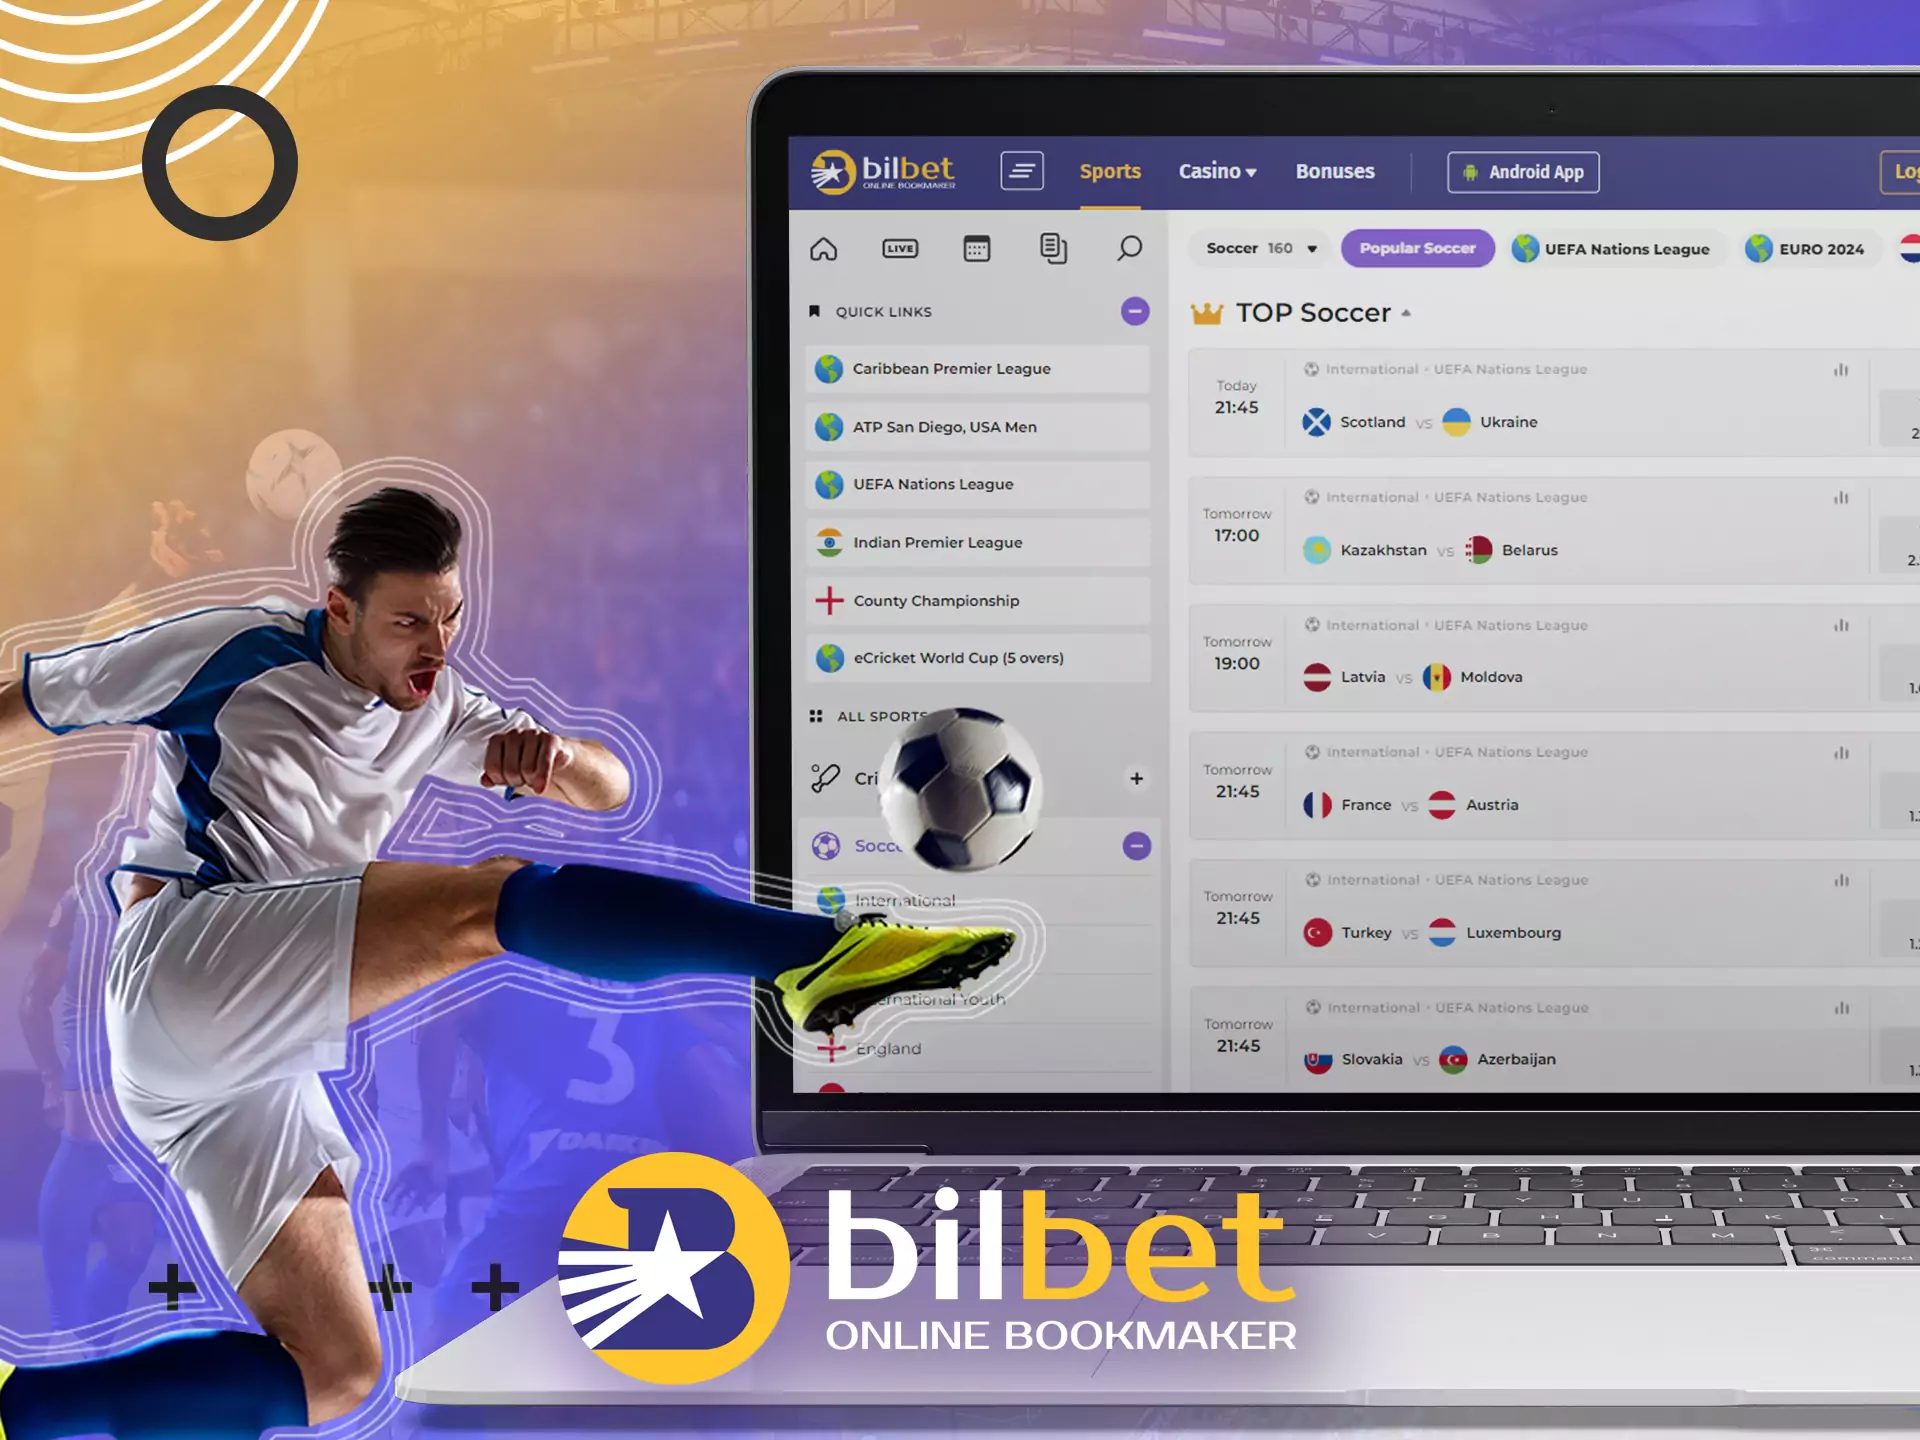 Football attracts many bettors from all over the world to the Bilbet online bookmaker.